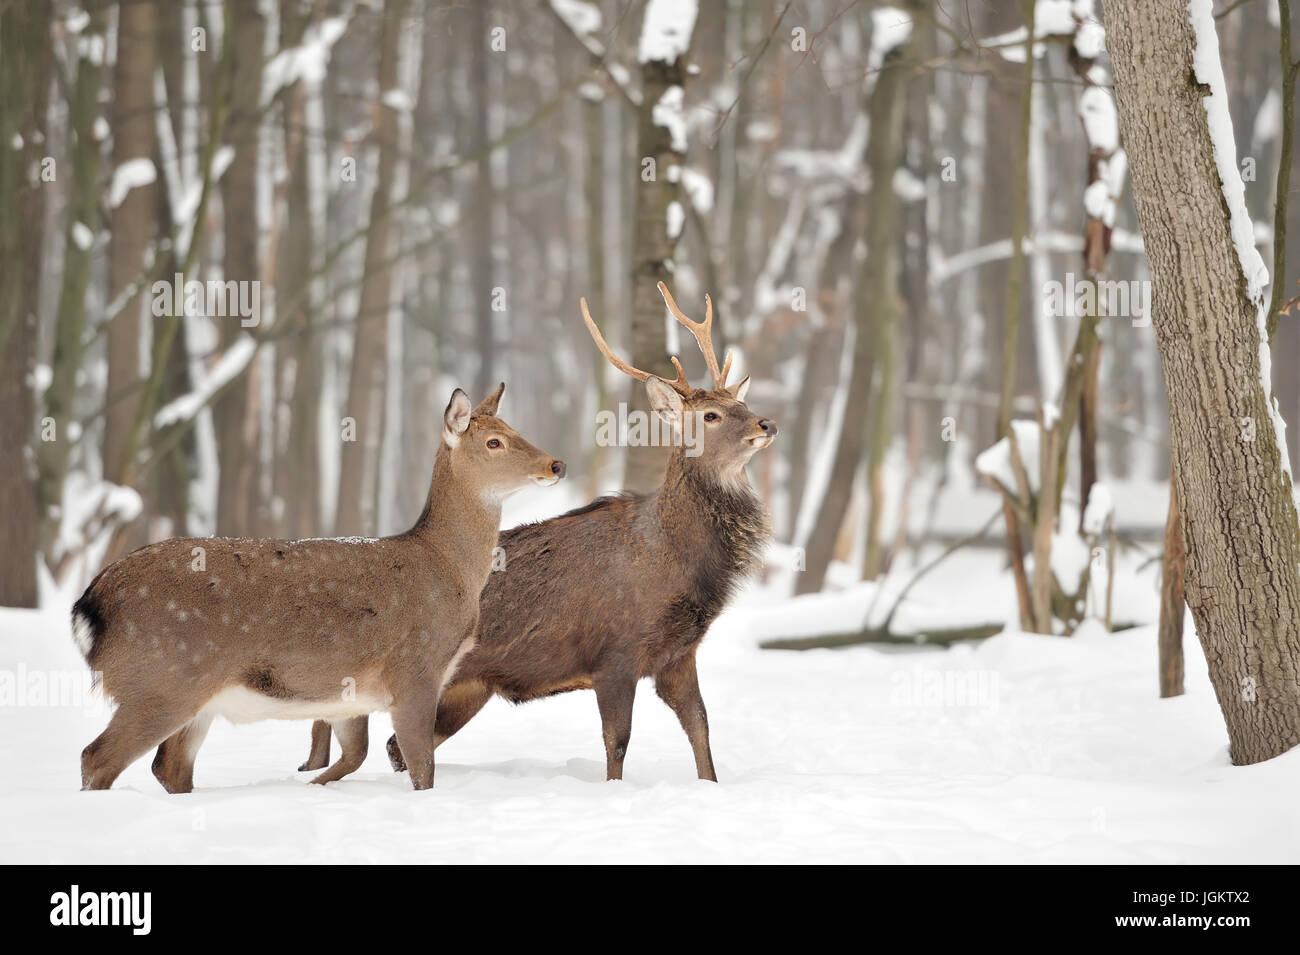 Young deer in winter forest Stock Photo